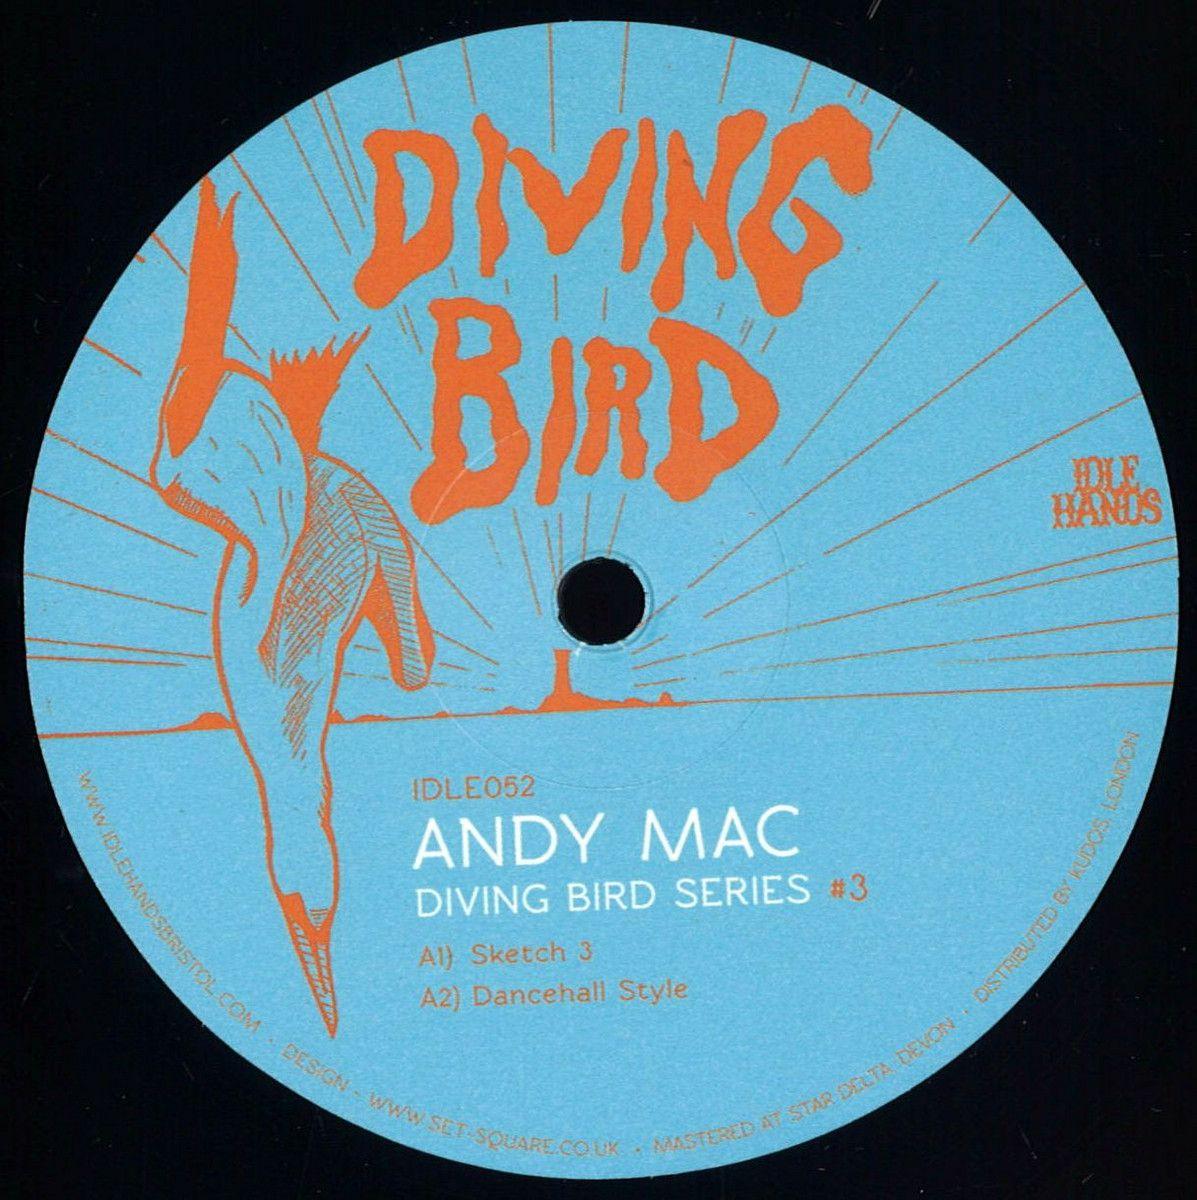 Diving Bird in Circle Logo - Andy Mac - Diving Bird 3 / Idle Hands IDLE052 - Vinyl